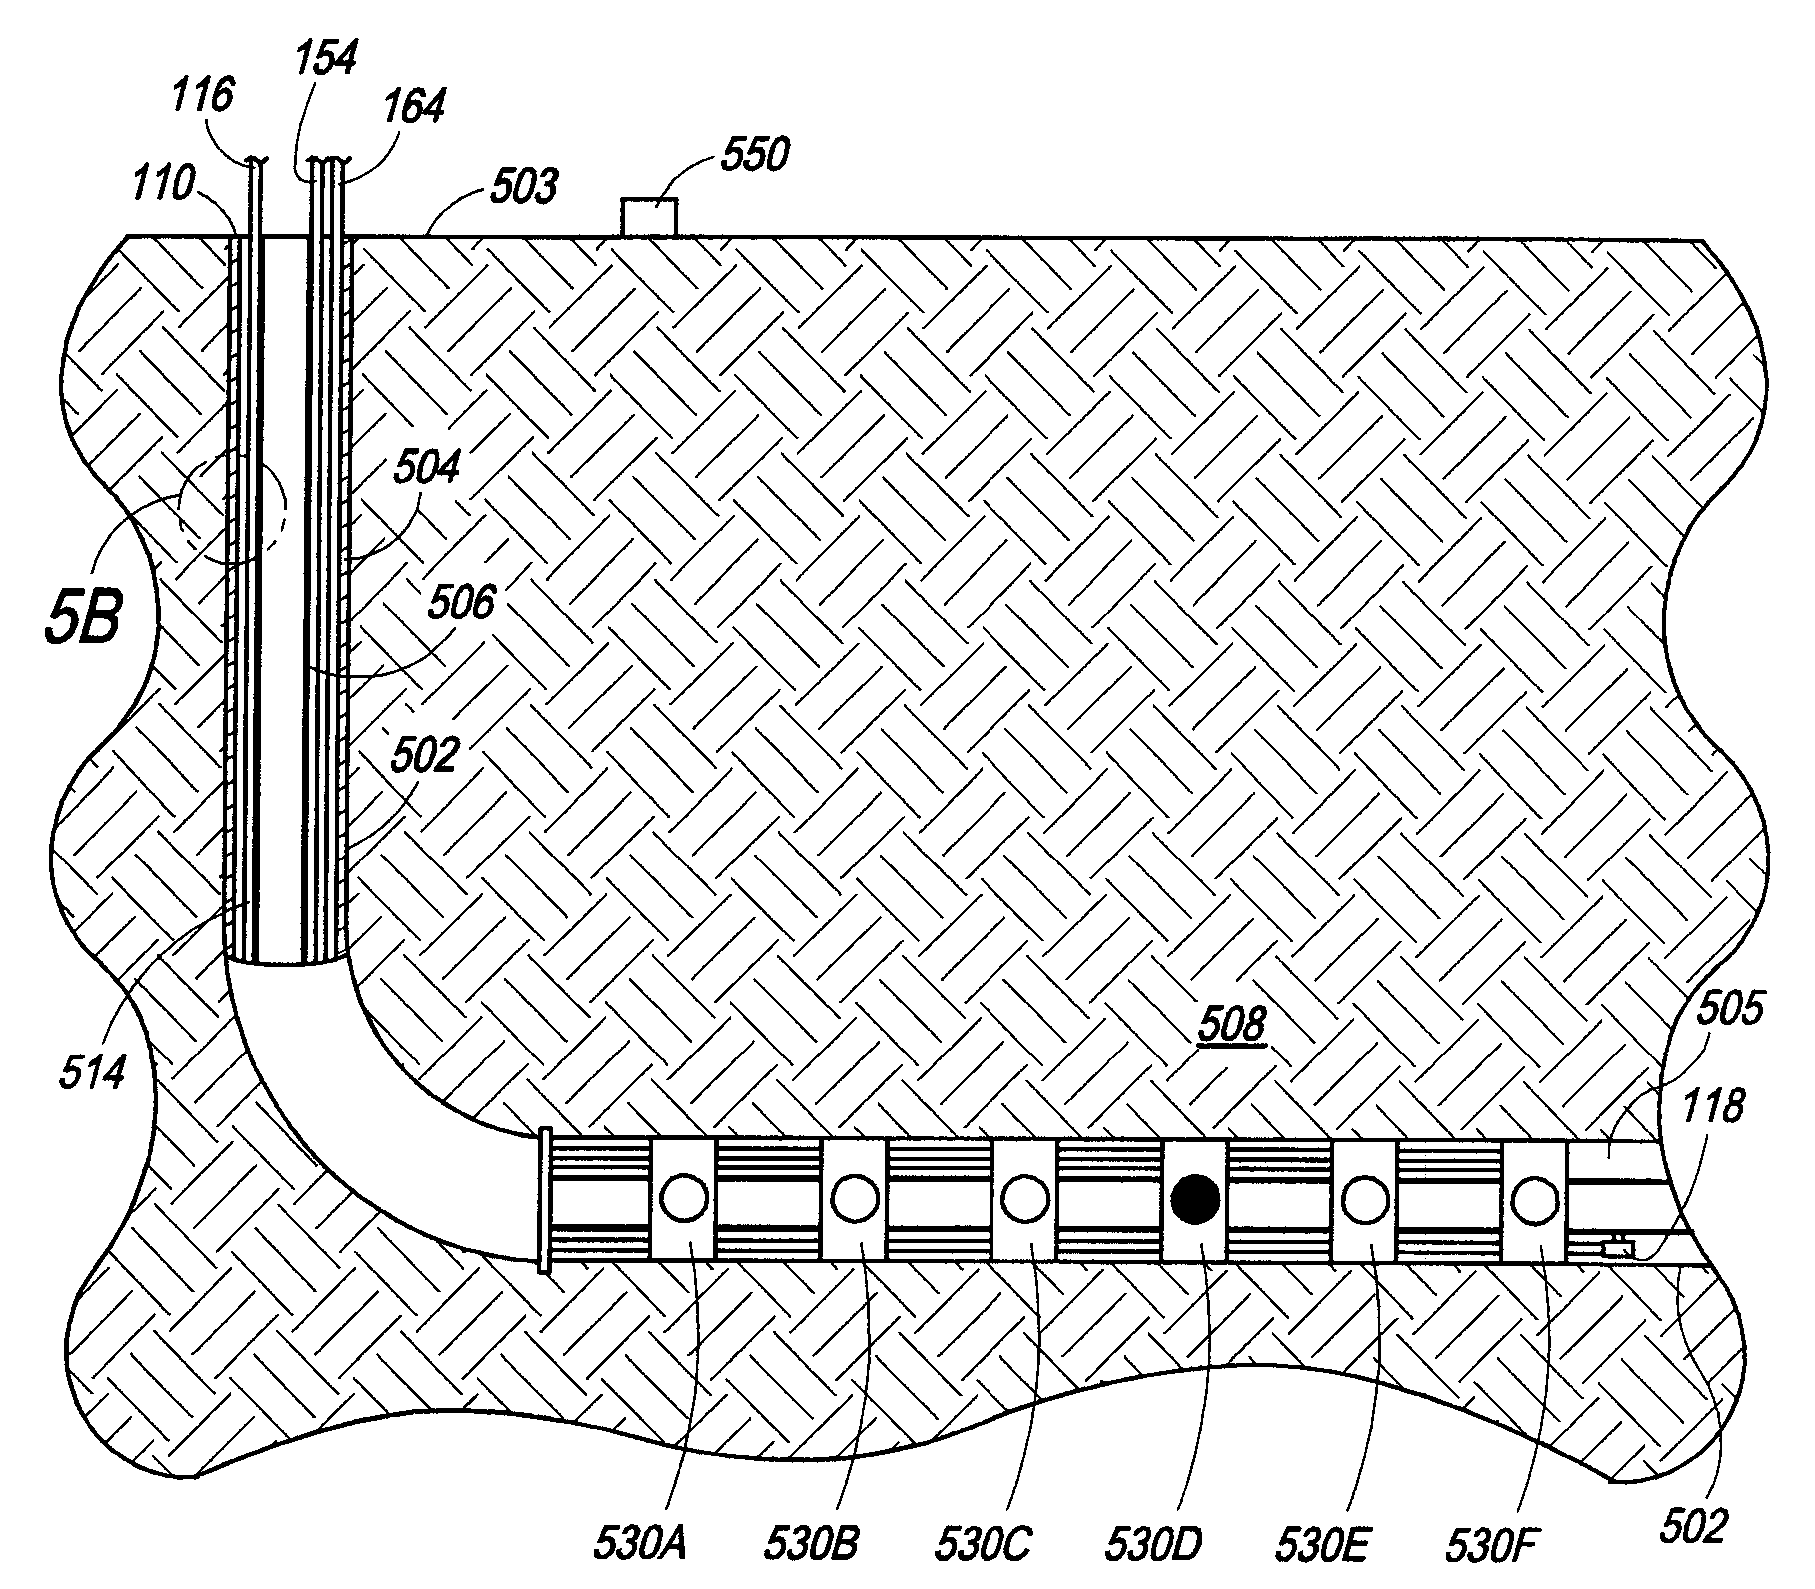 Systems, assemblies and processes for controlling tools in a well bore